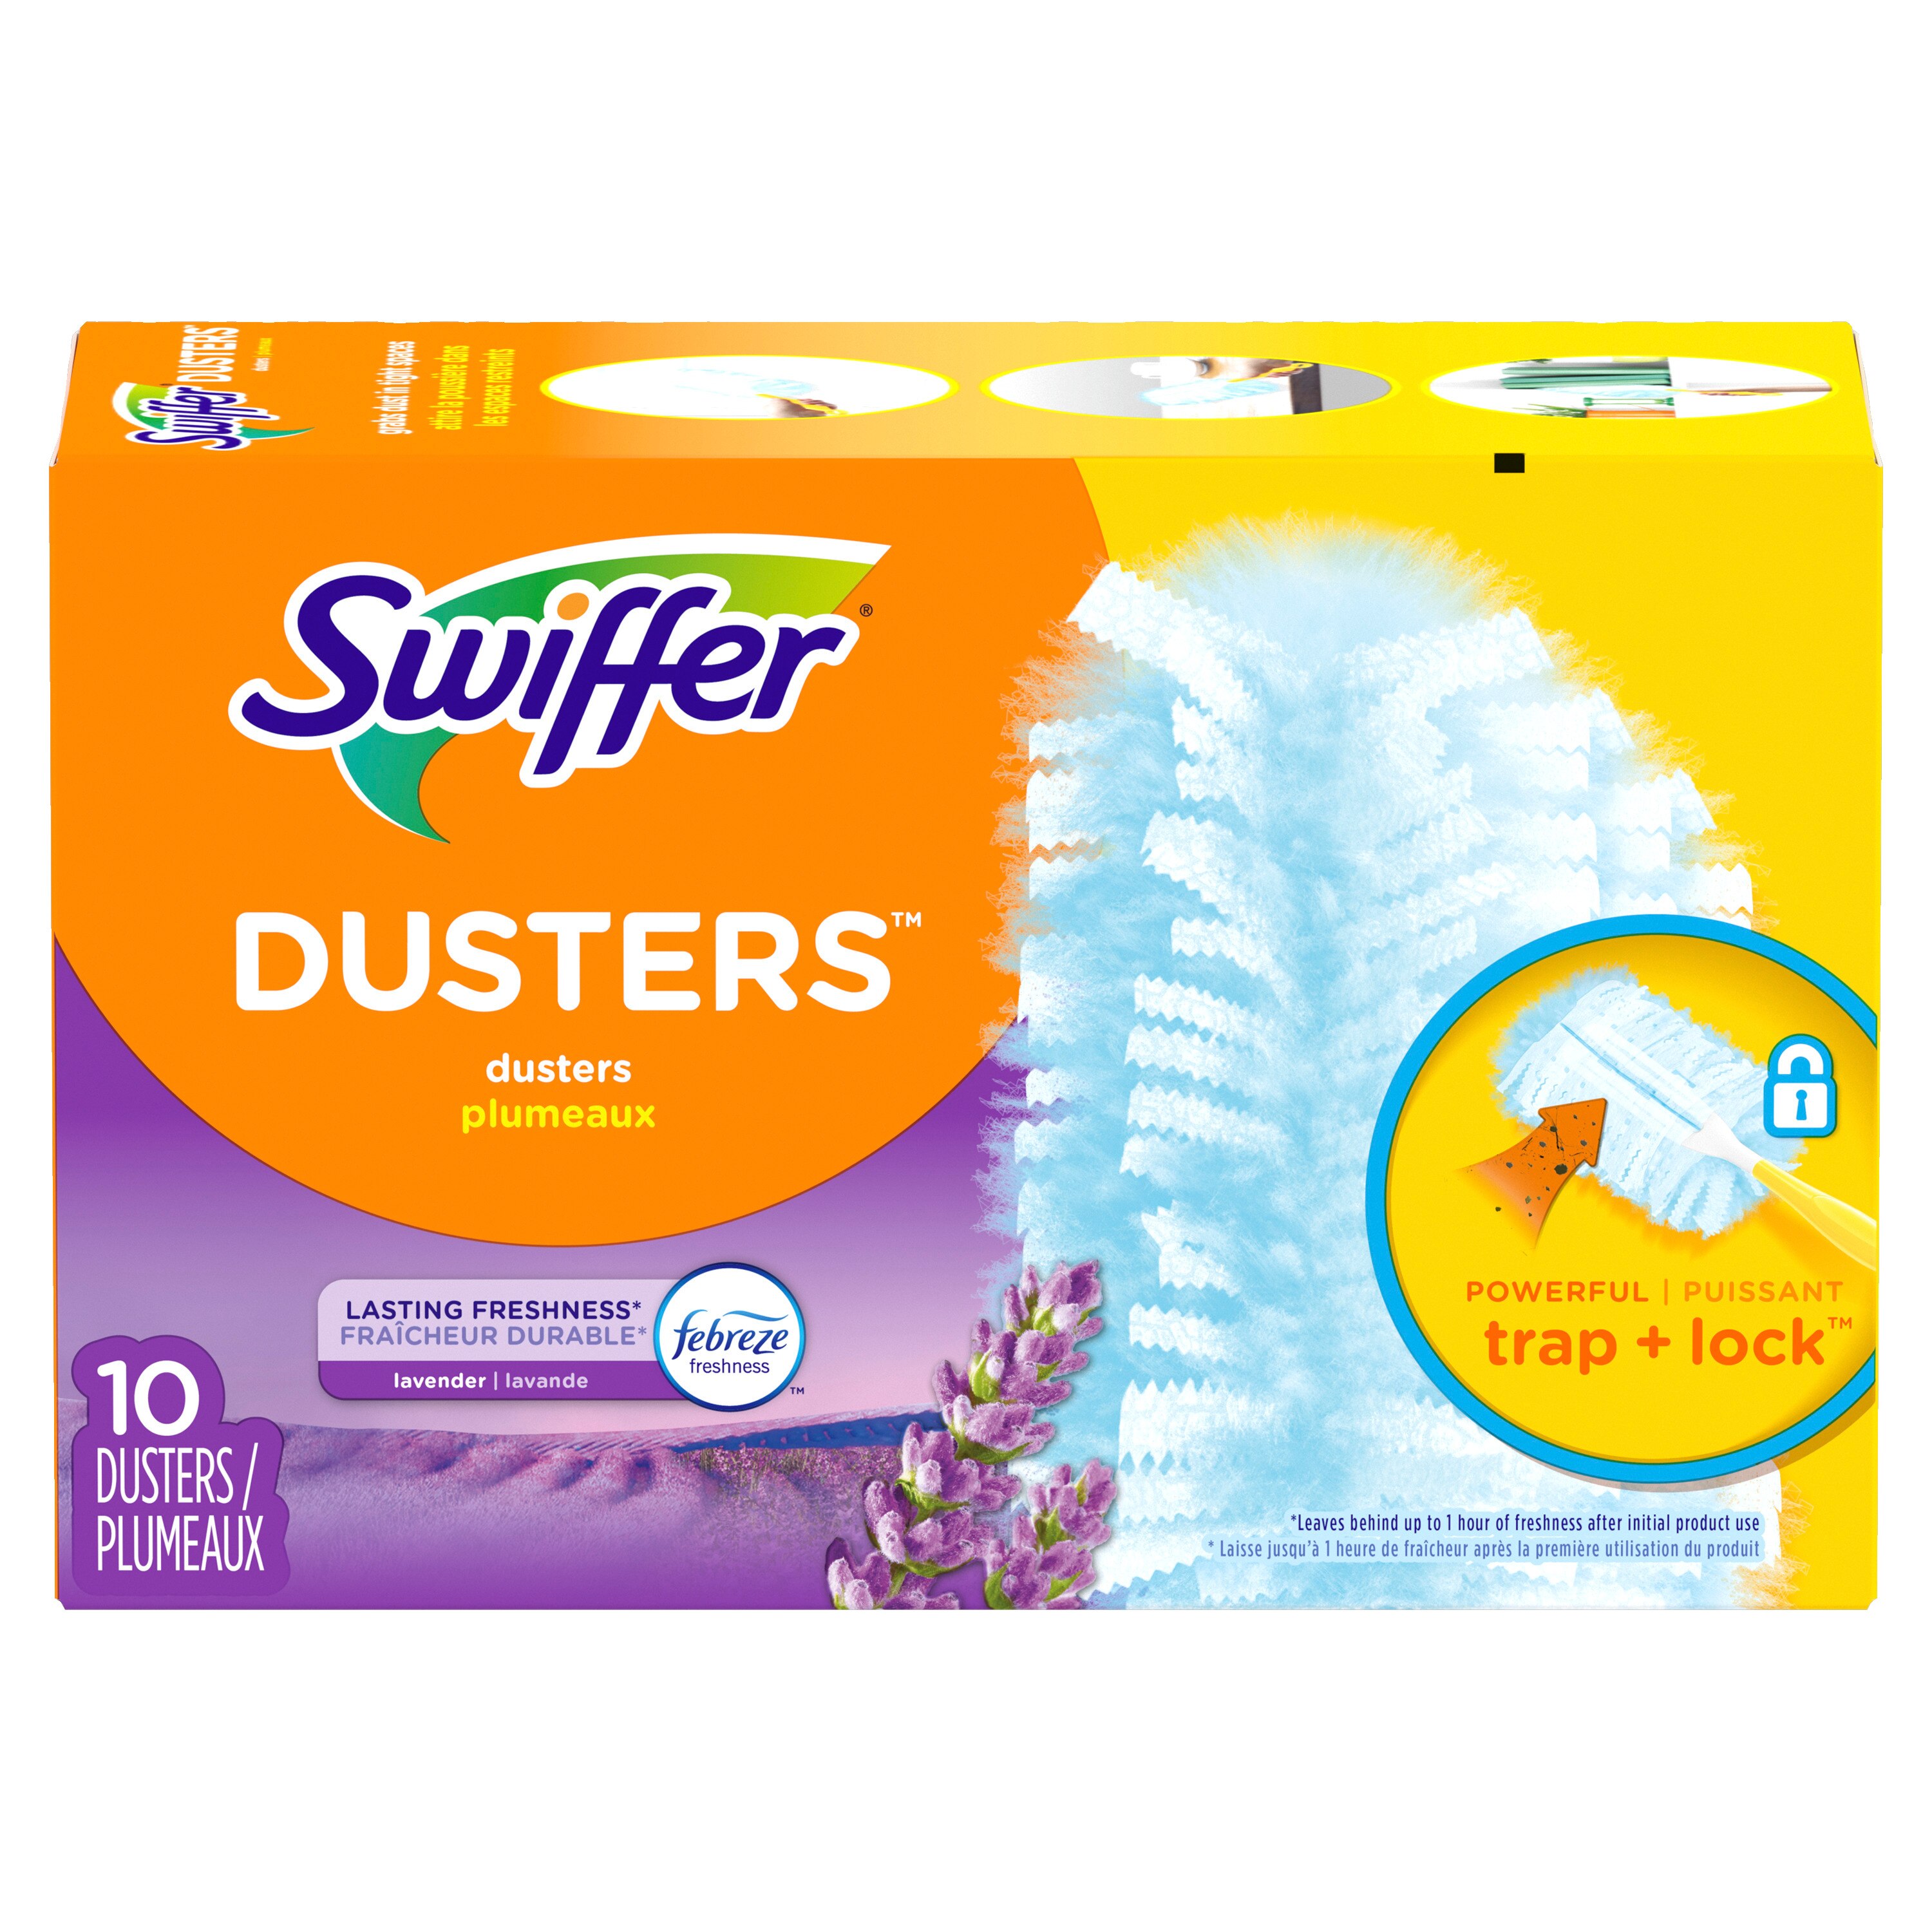 Swiffer Dusters Multi-Surface Duster Refills for Cleaning, Lavender Scent, 10 ct